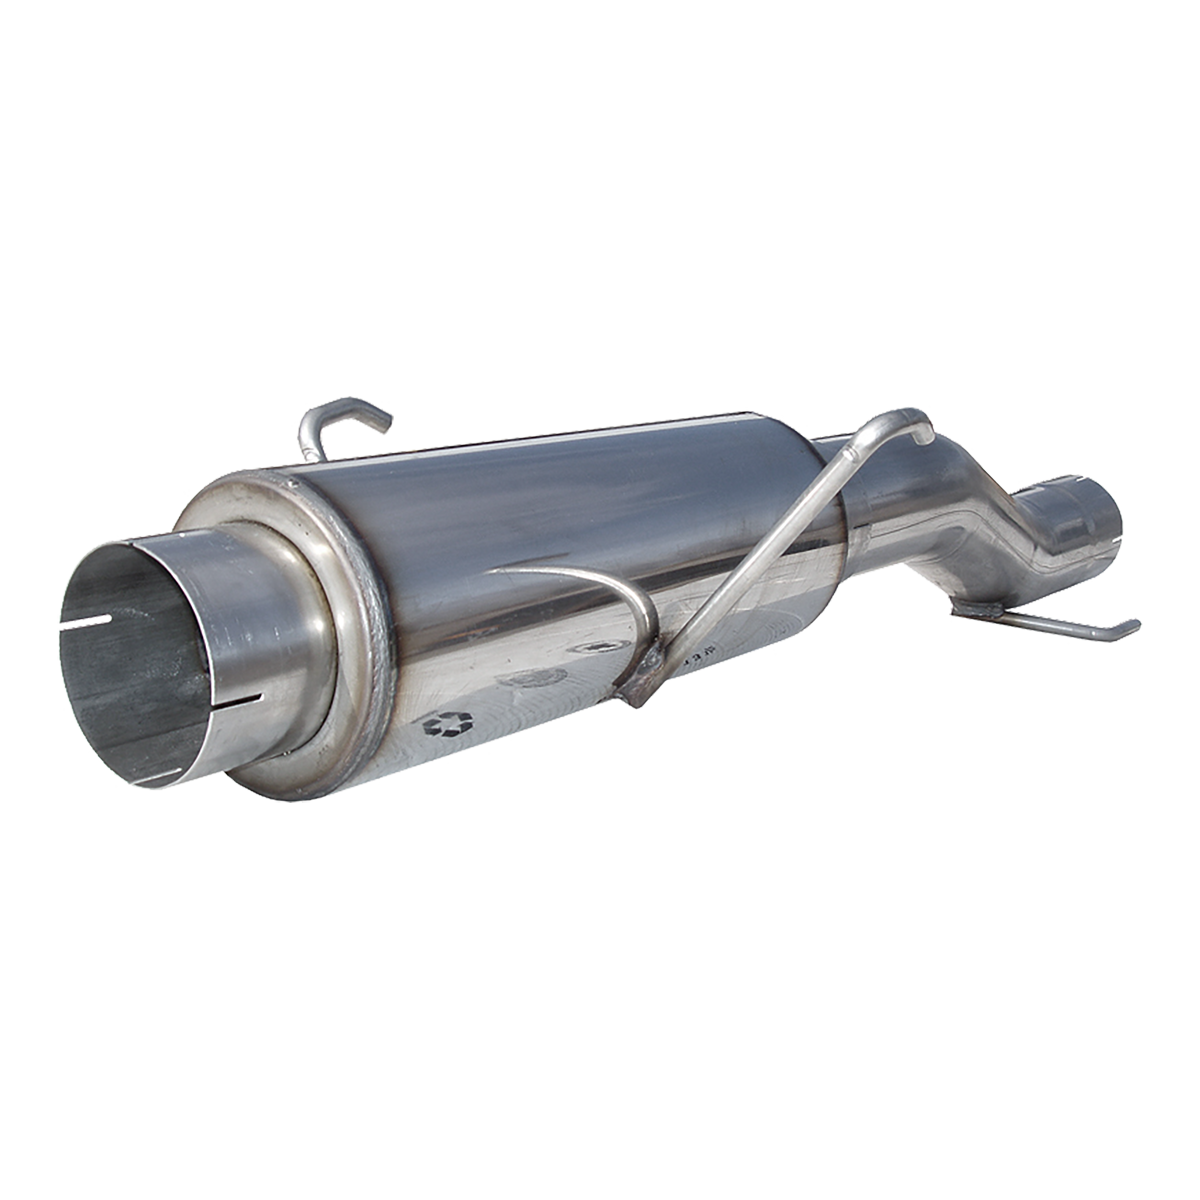 MBRP - MBRP High-Flow Muffler Assembly T409 Stainless Steel For 04-07 Dodge Ram Cummins 600/610 fits to stock only MK96116